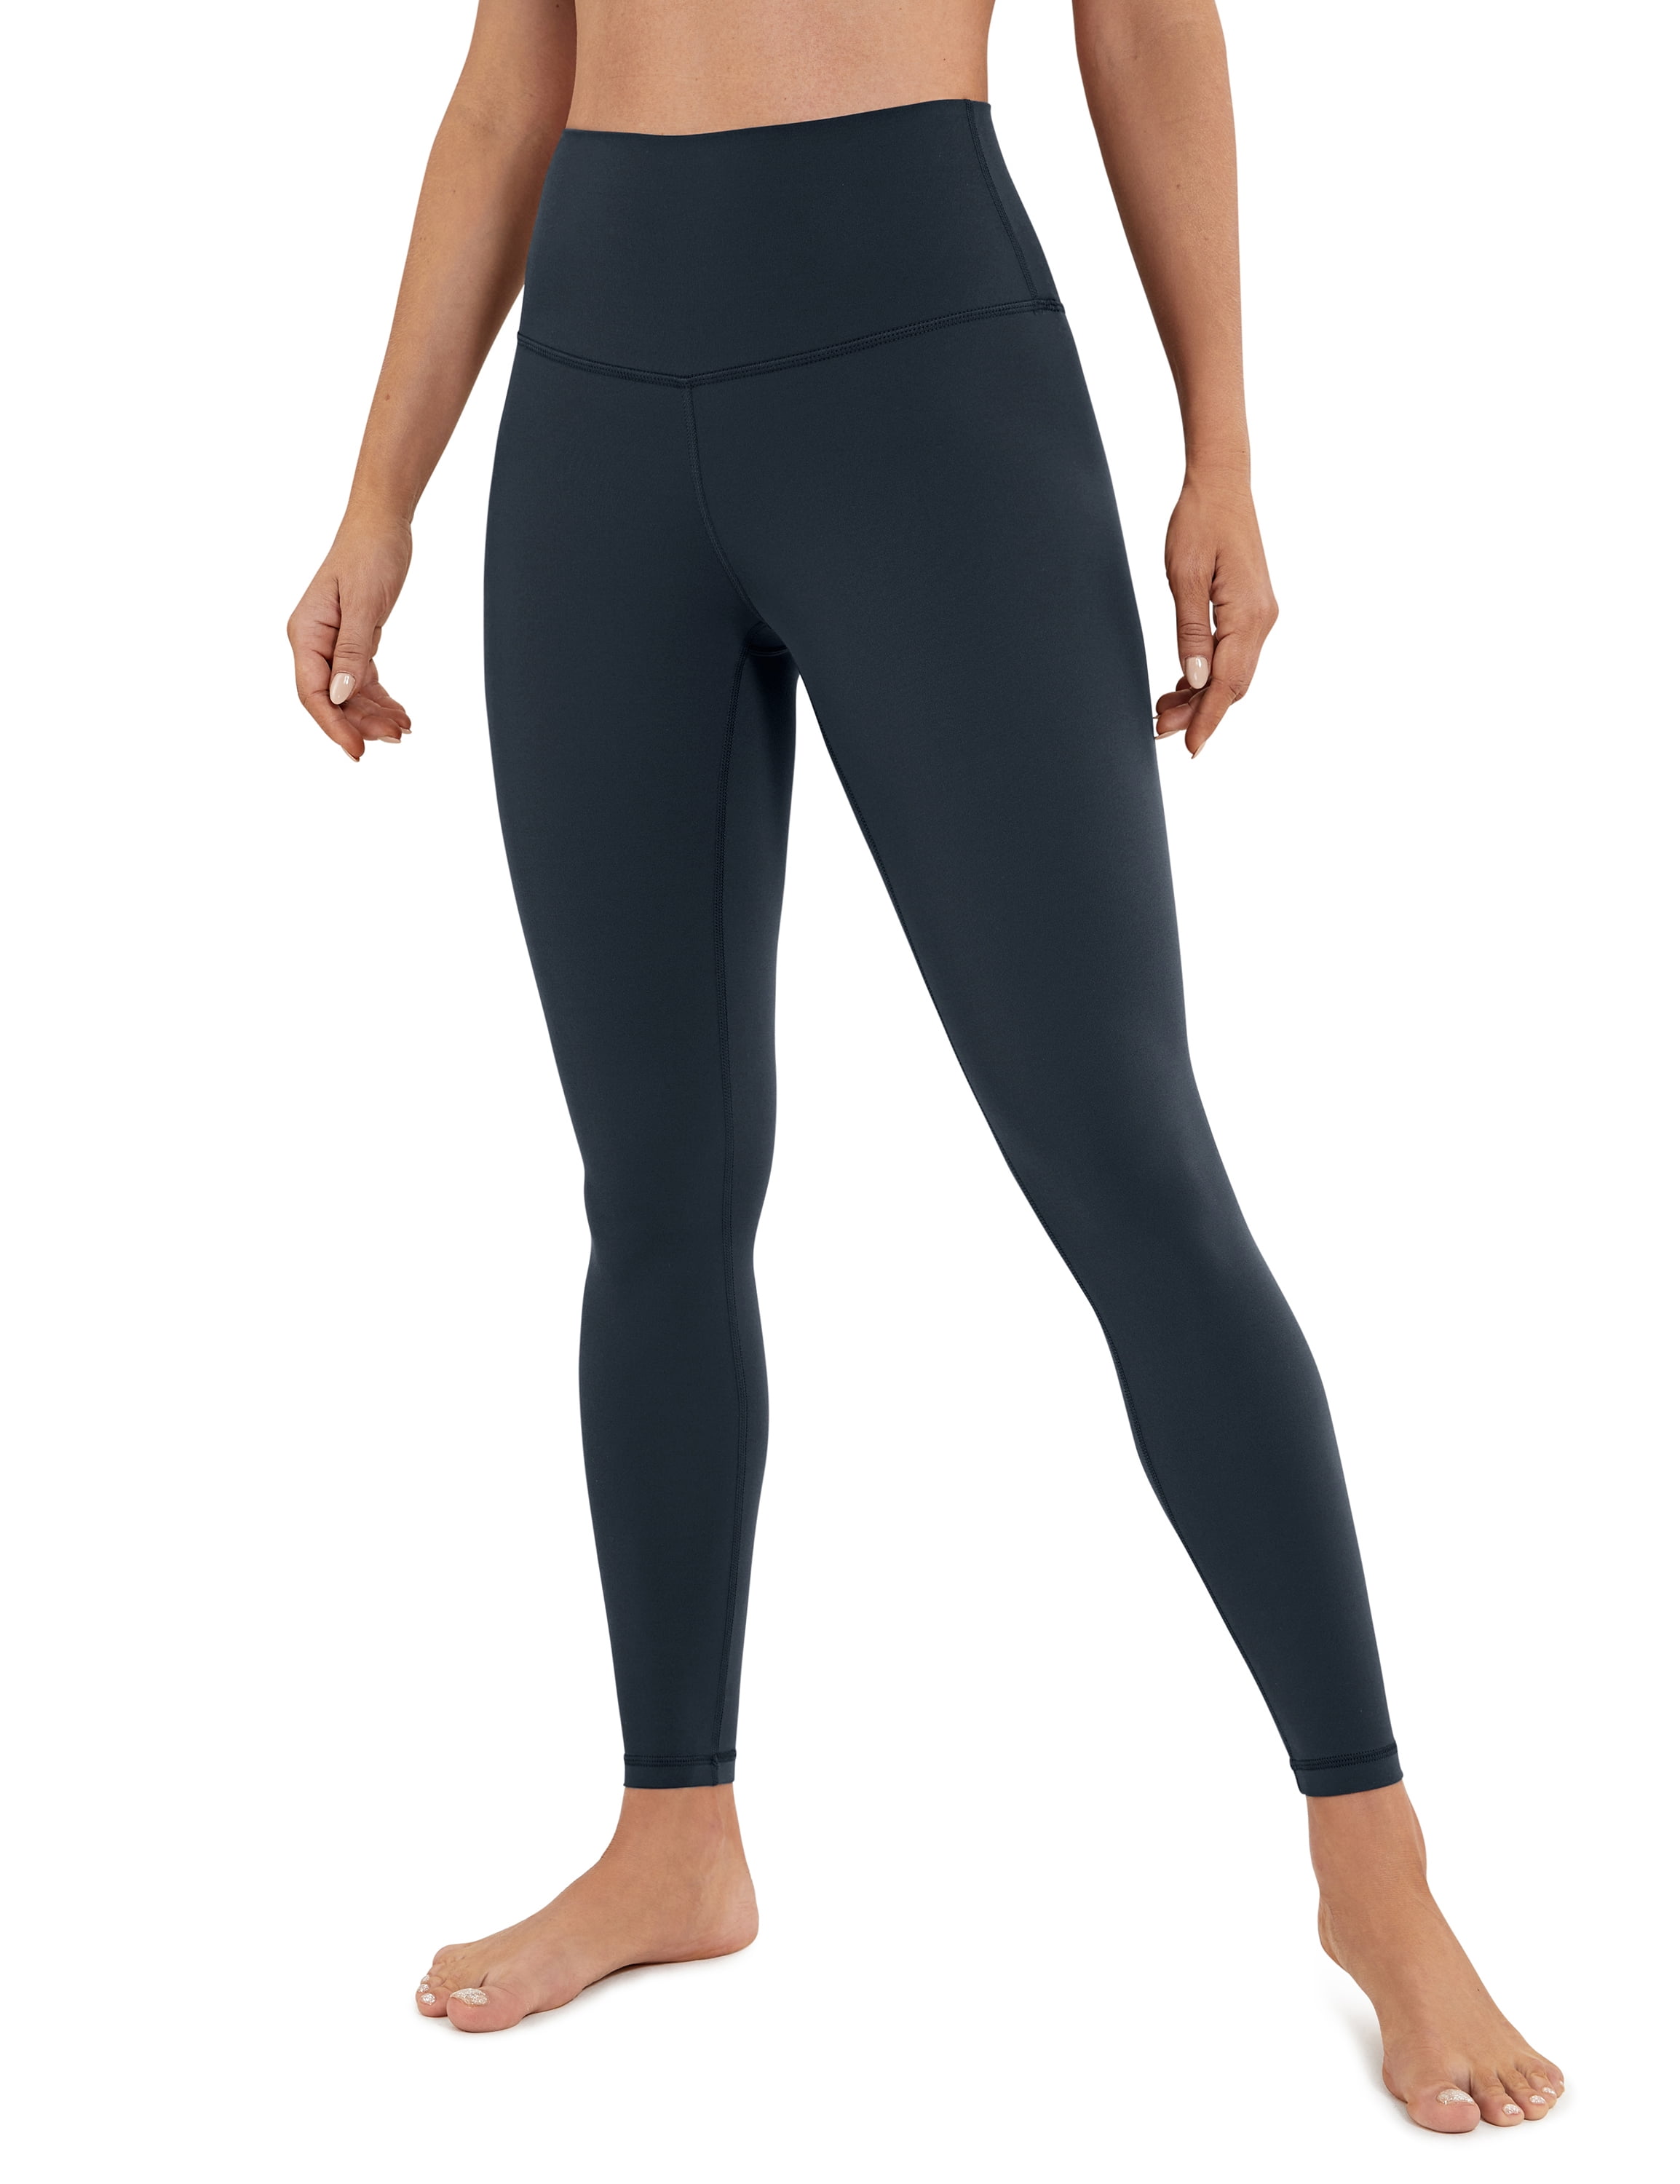 CRZ YOGA Womens Thermal Fleece Lined High Waisted Leggings 24 Inches -  Workout Winter Warm Thick Tights Soft Yoga Pants Savannah Medium at   Women's Clothing store